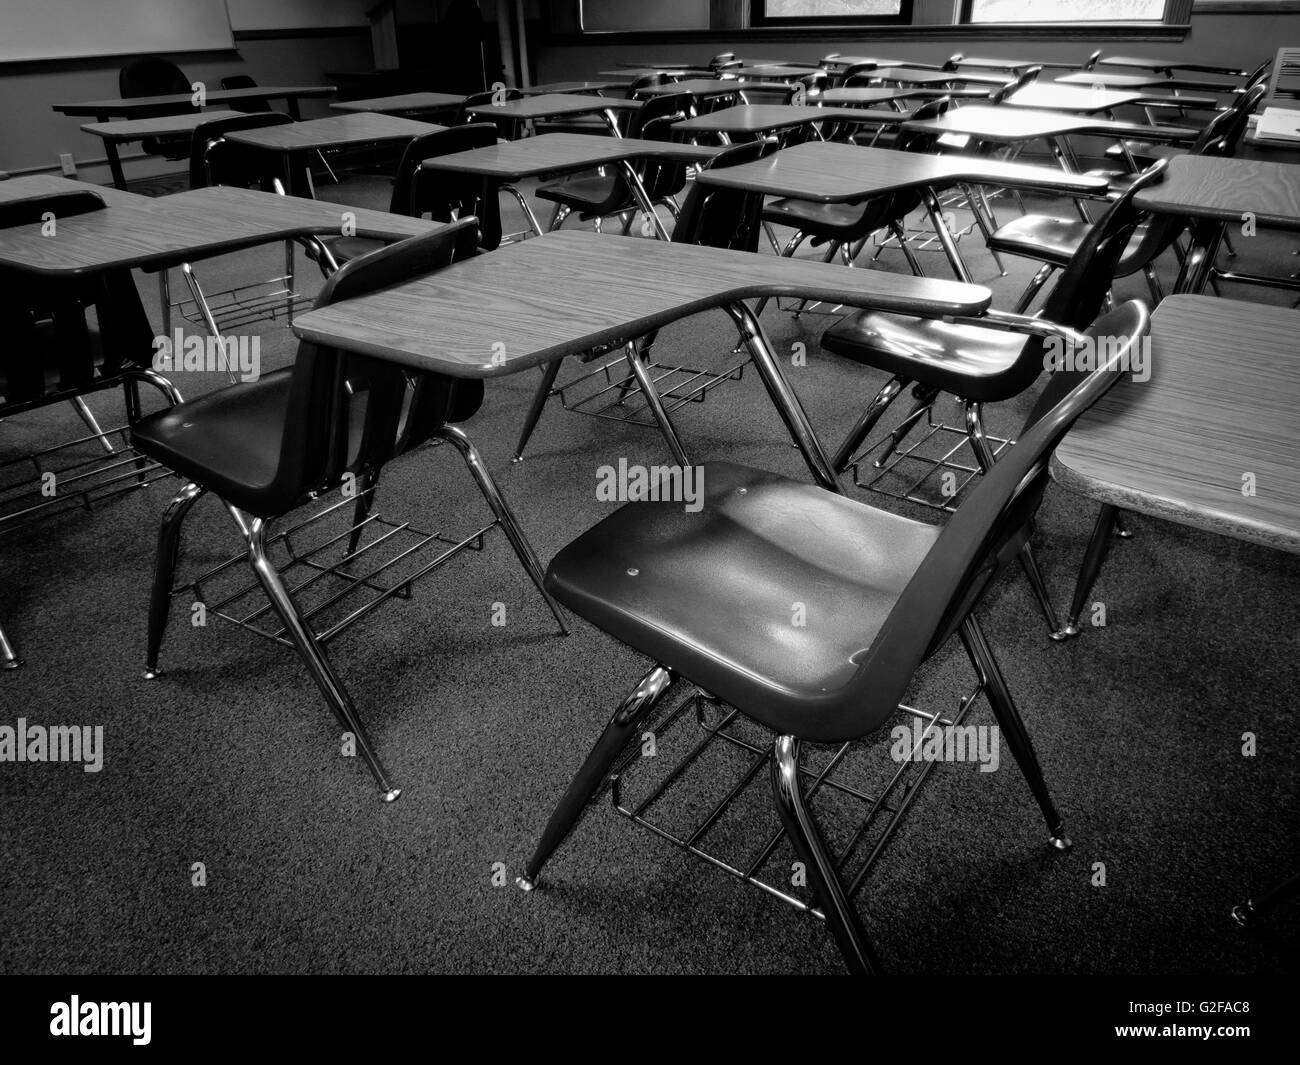 Classroom with Rows of Desks Stock Photo